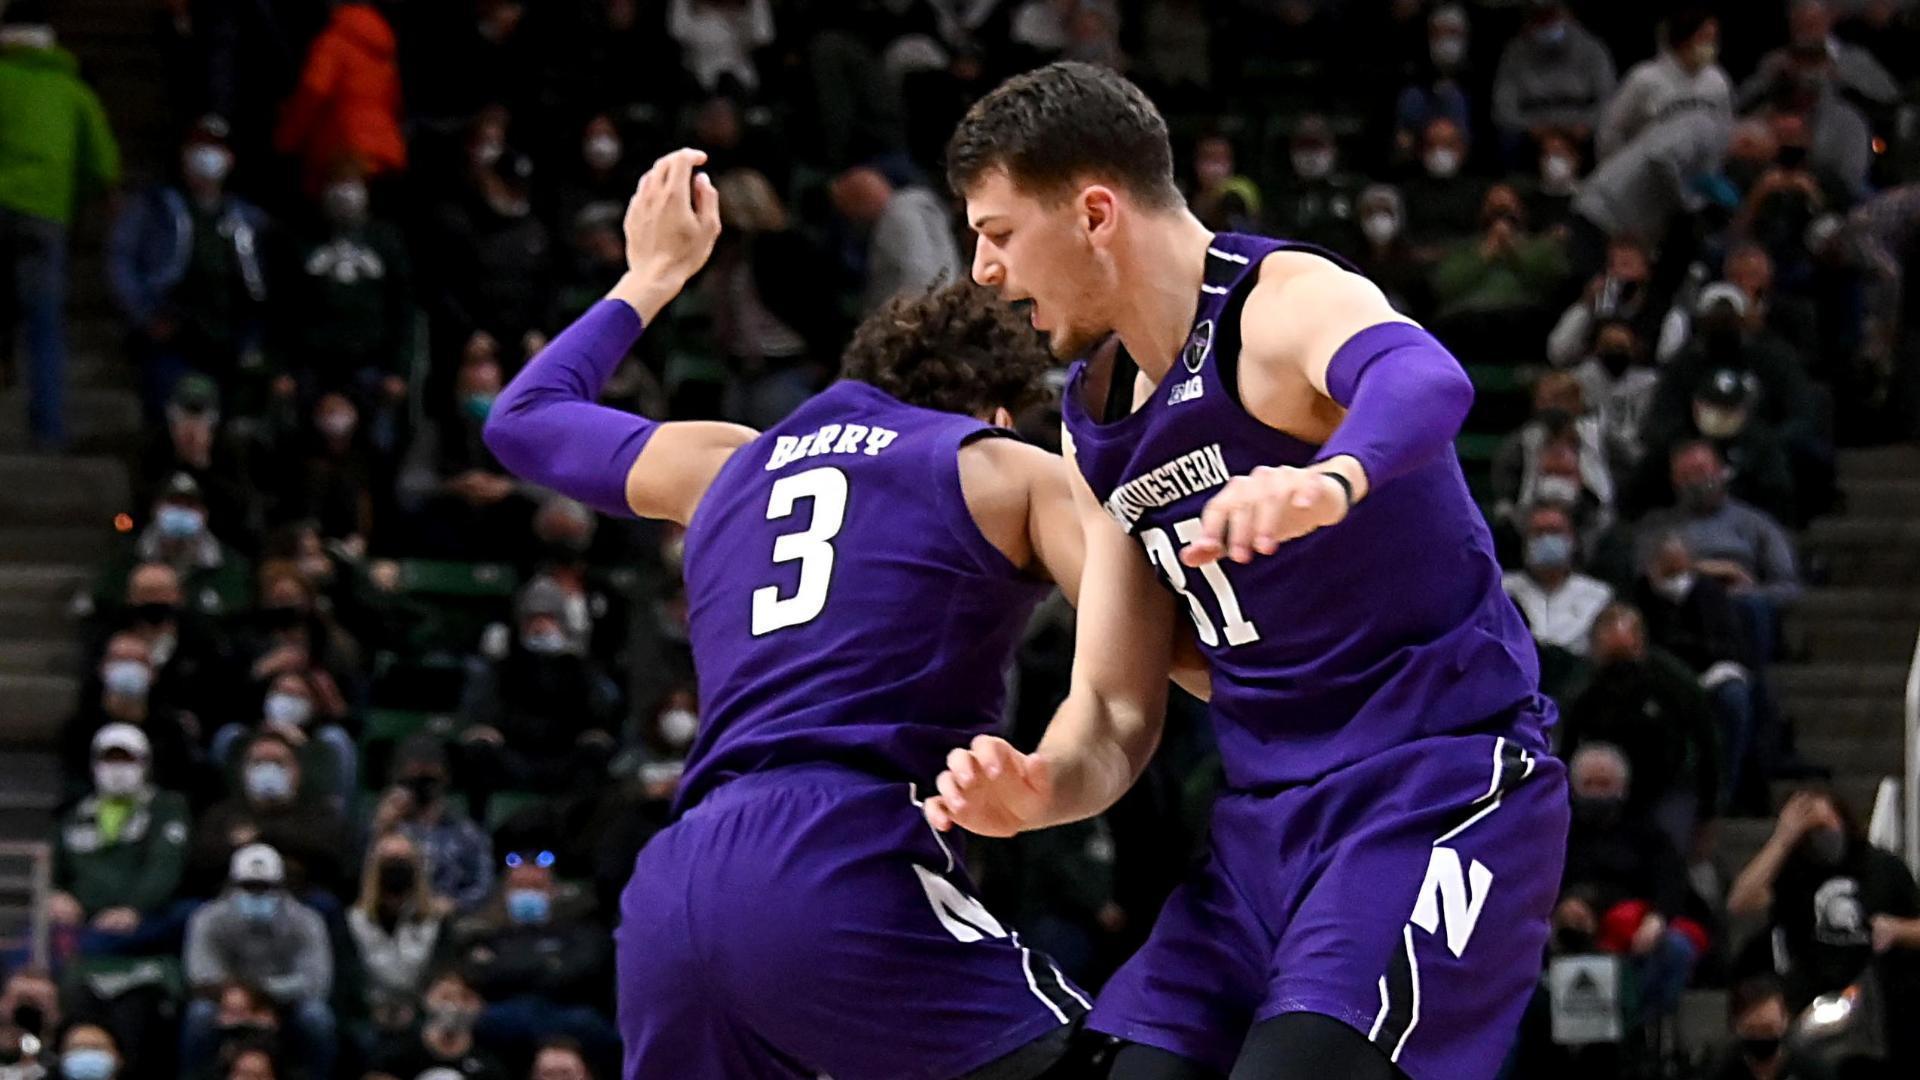 Northwestern holds on to upset No. 10 Michigan State on the road in wild finish